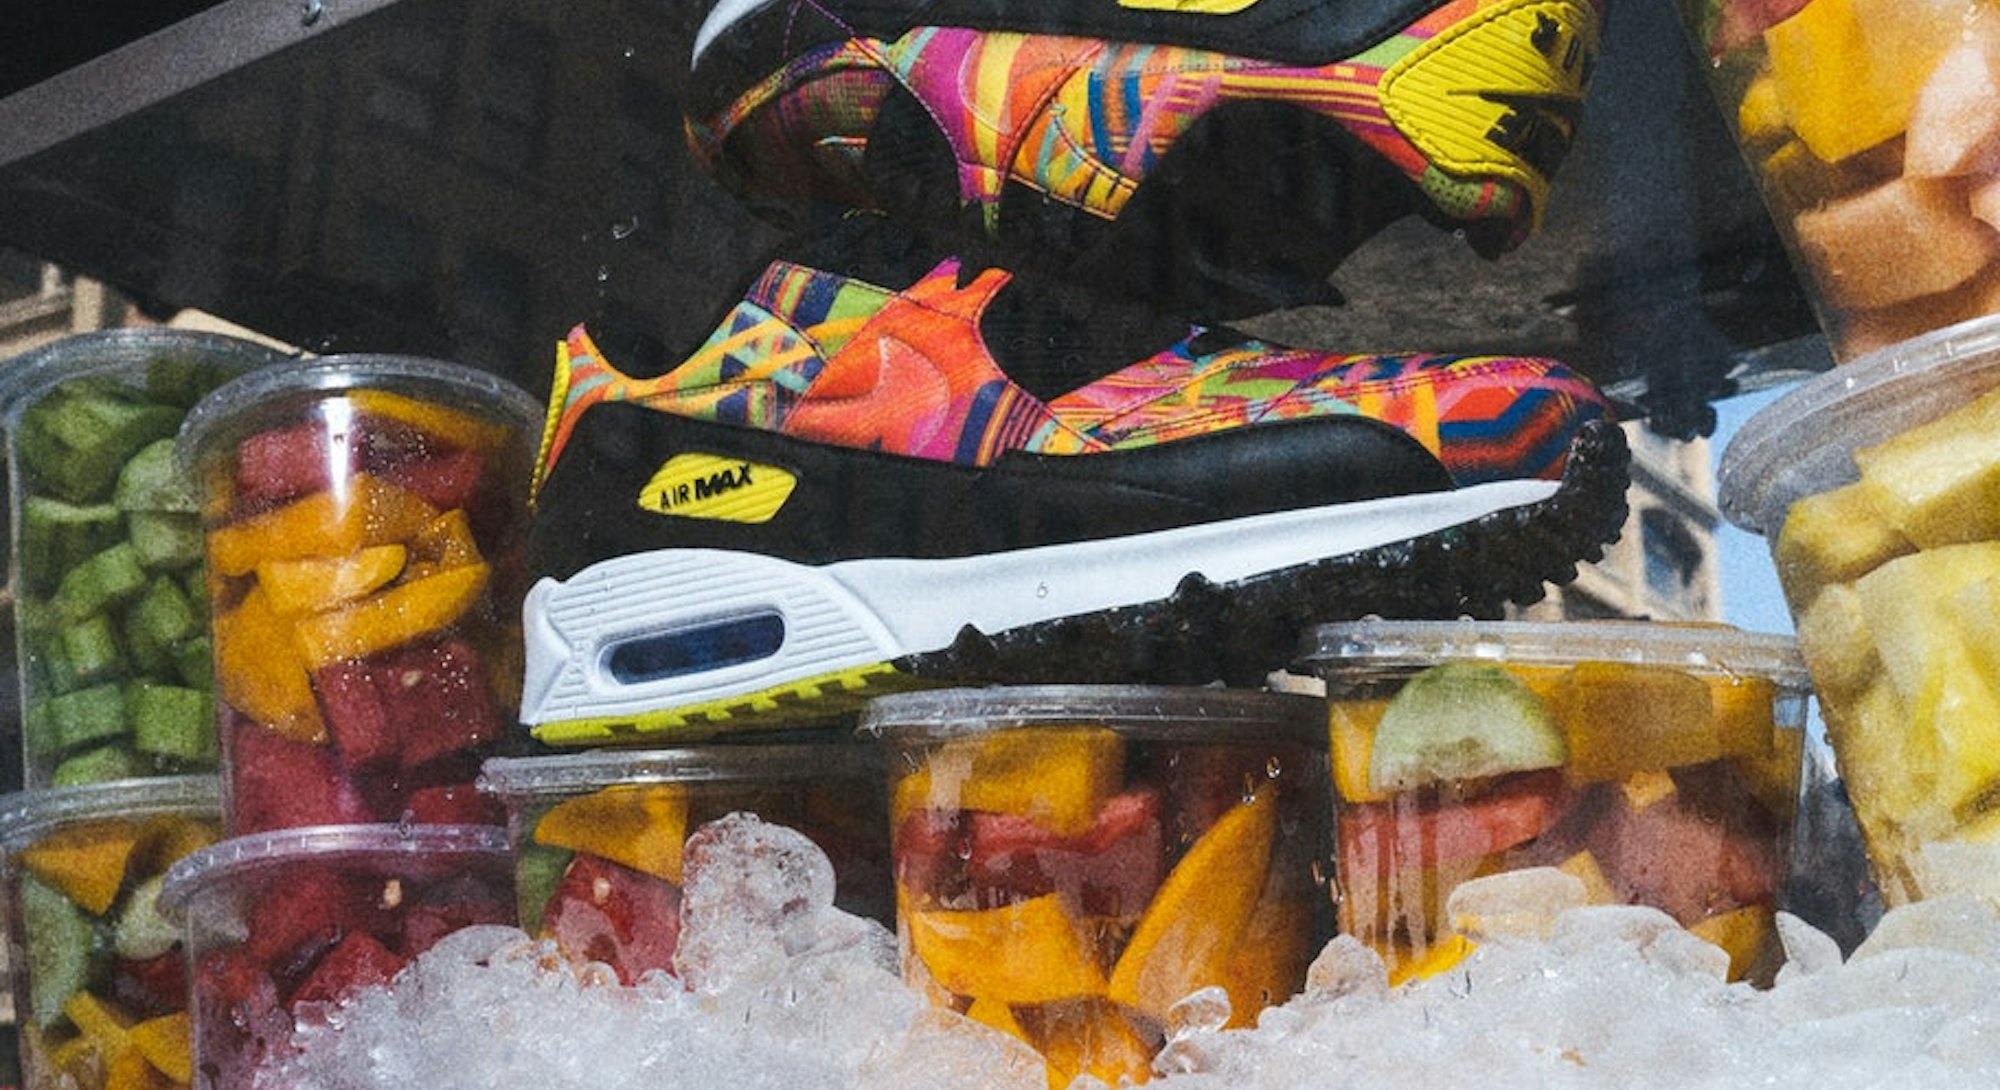 The best Air Max sneakers you need to celebrate Nike's Air